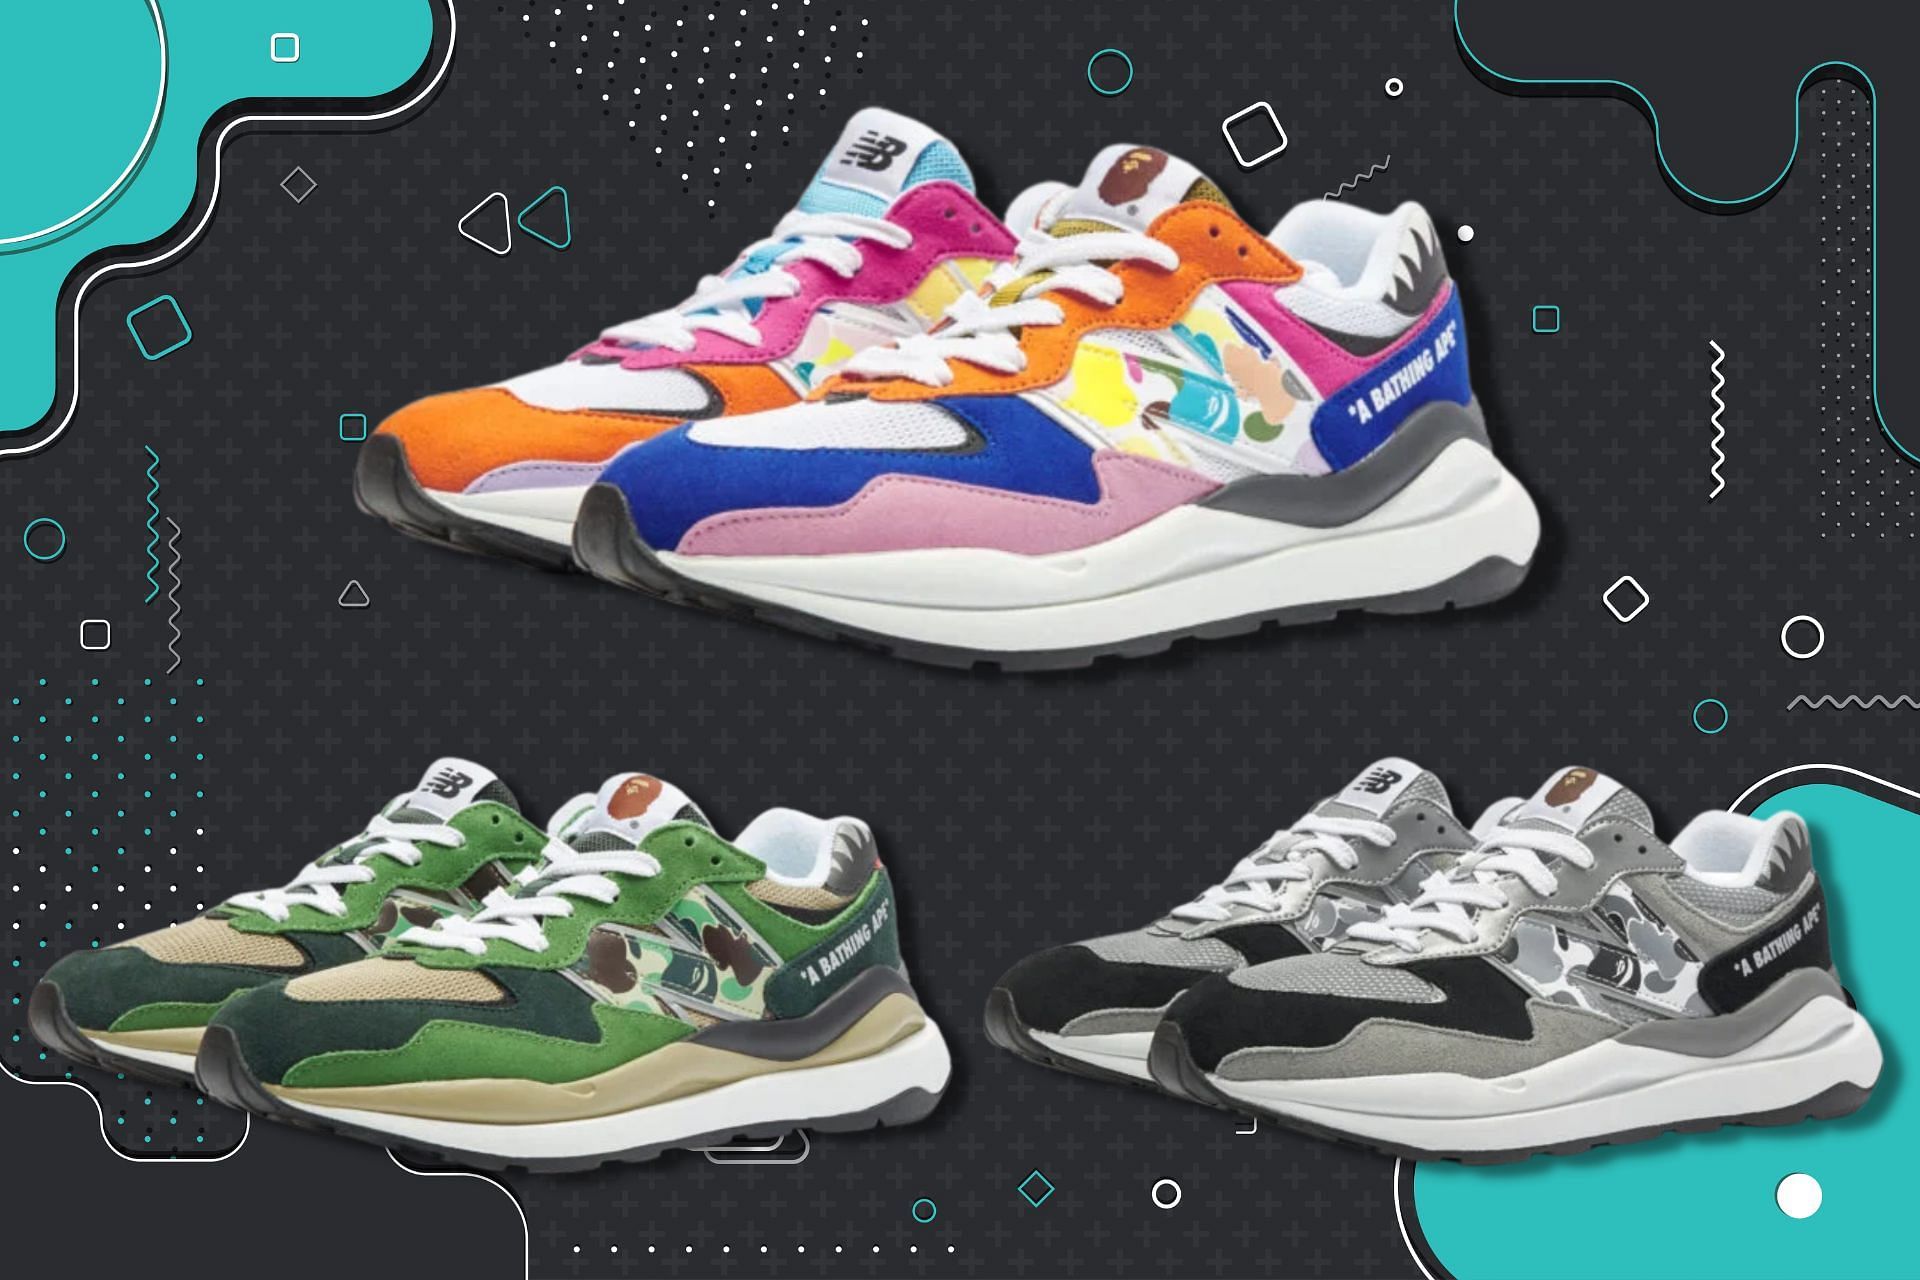 New Balance joined forces with Japanese brand for a sneaker collection (Image via Sportskeeda)